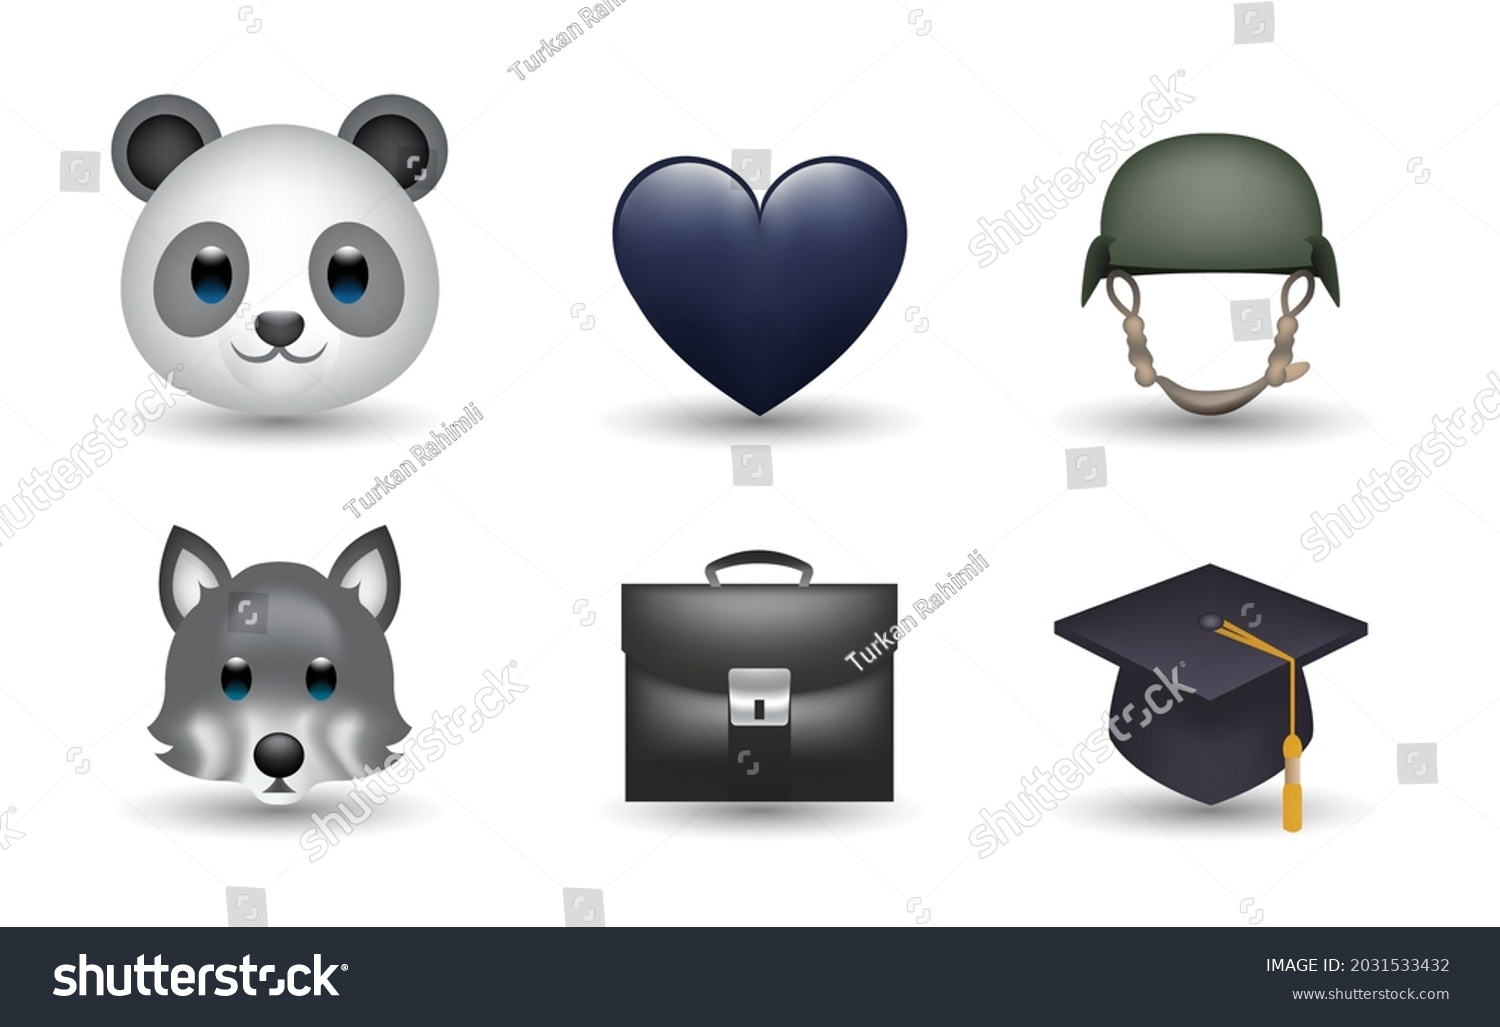 SVG of 6 Emoticon isolated on White Background. Isolated Vector Illustration. Panda, heart, helmet, wolf, briefcase, bachelor cap vector emoji Illustration. Set of 3d objects Illustration in black color svg